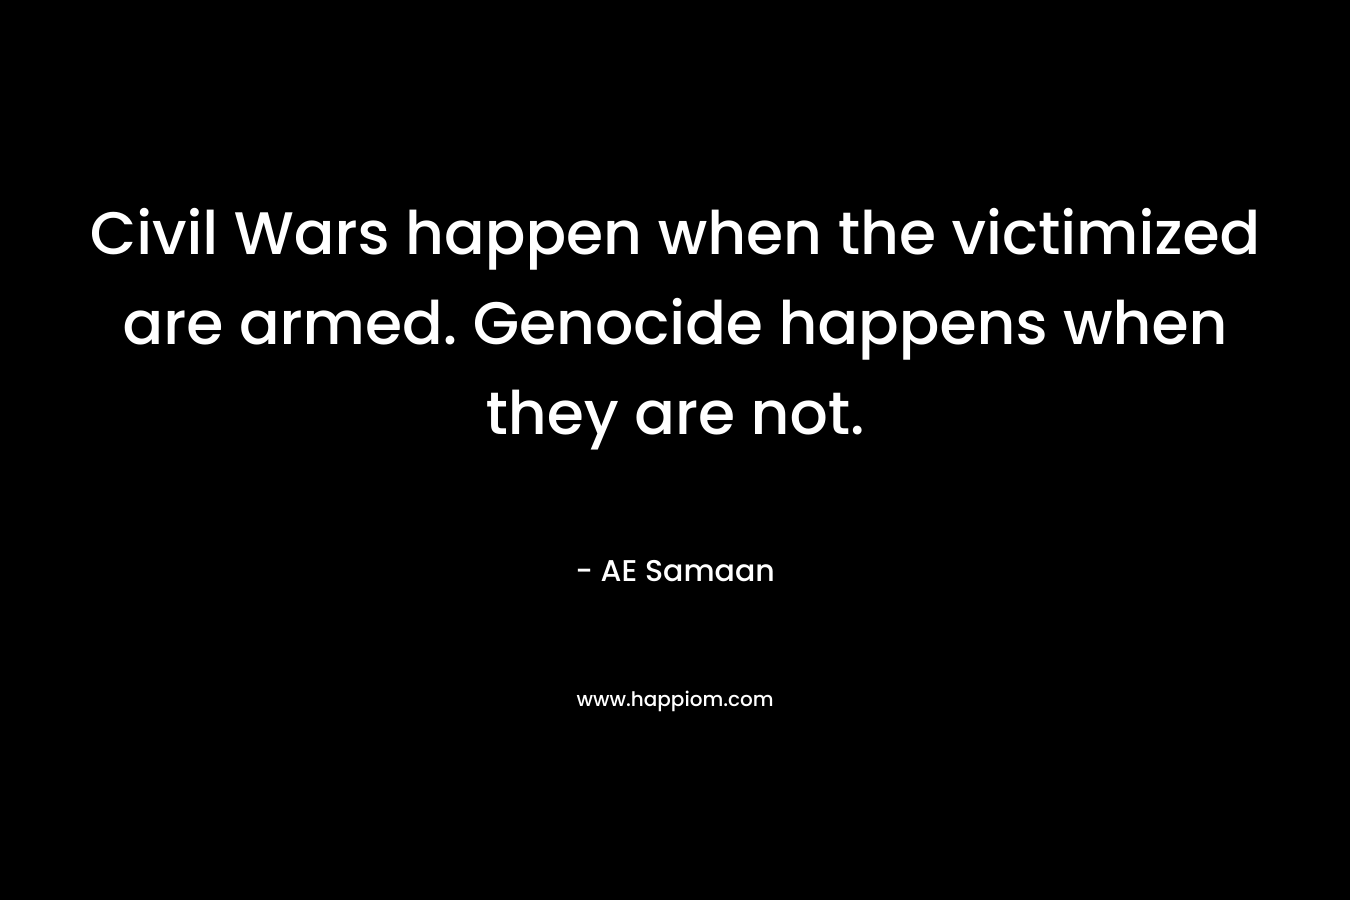 Civil Wars happen when the victimized are armed. Genocide happens when they are not.